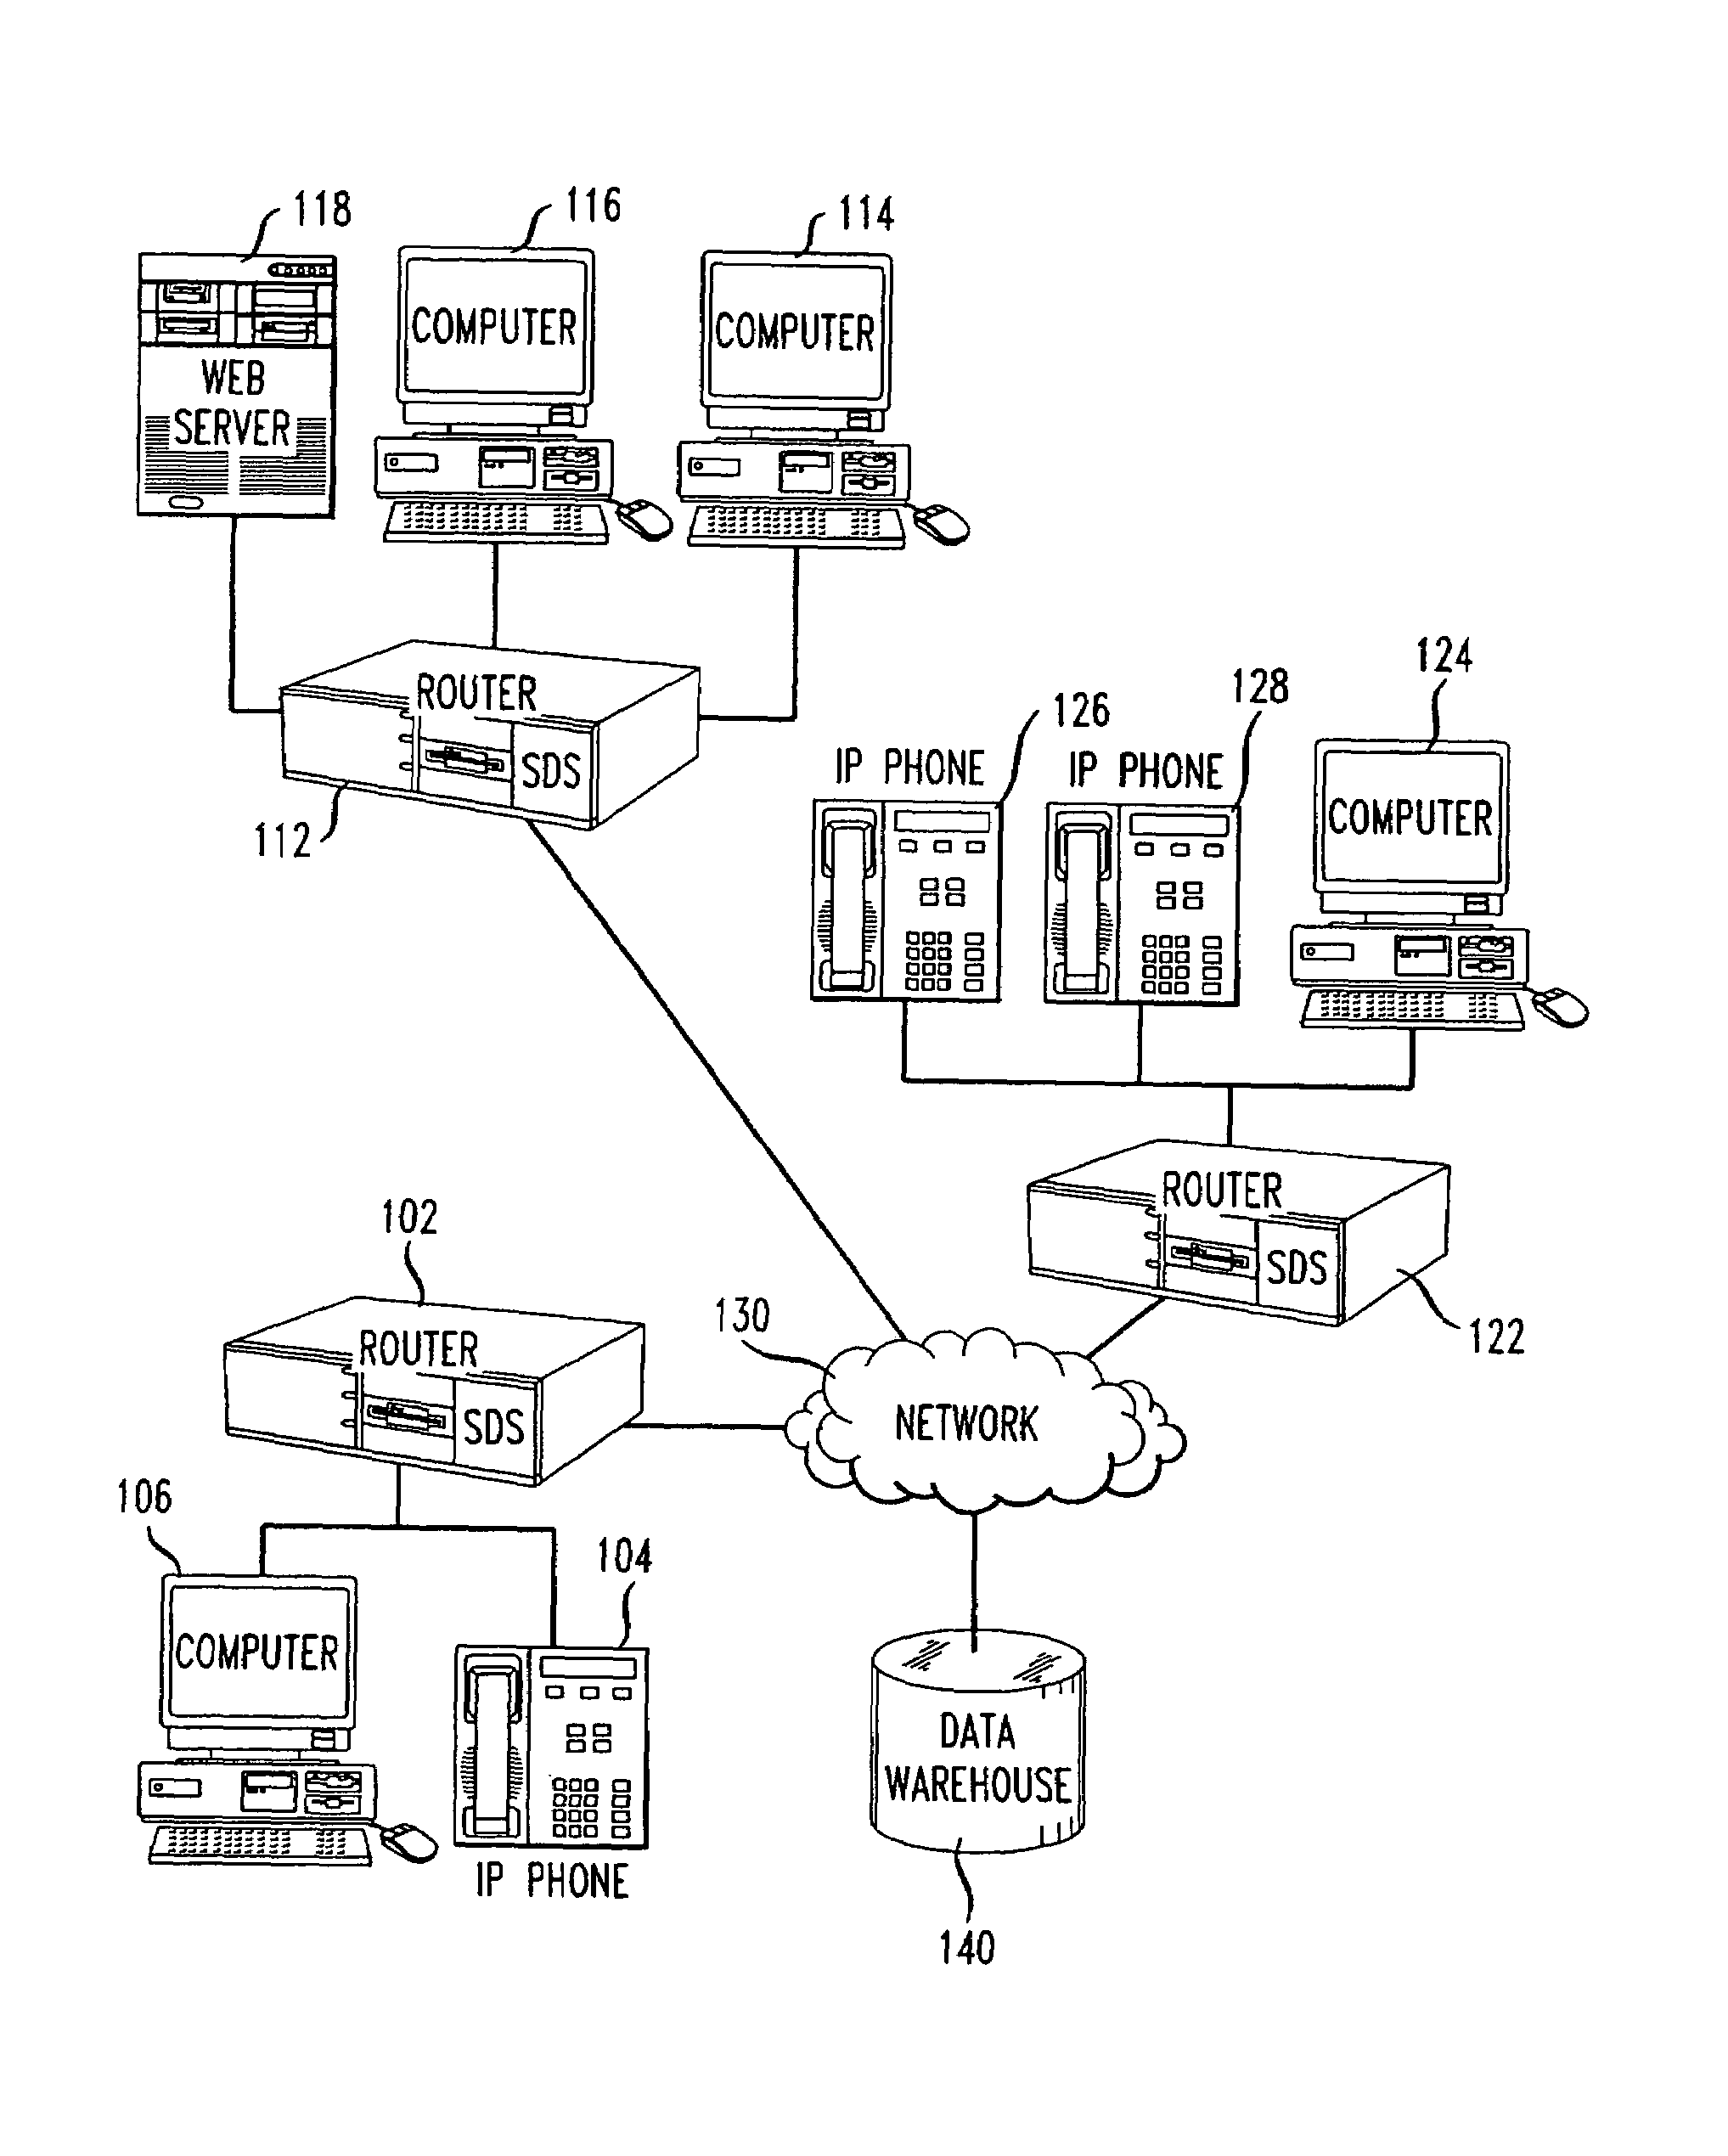 Method and apparatus for using wavelets to produce data summaries